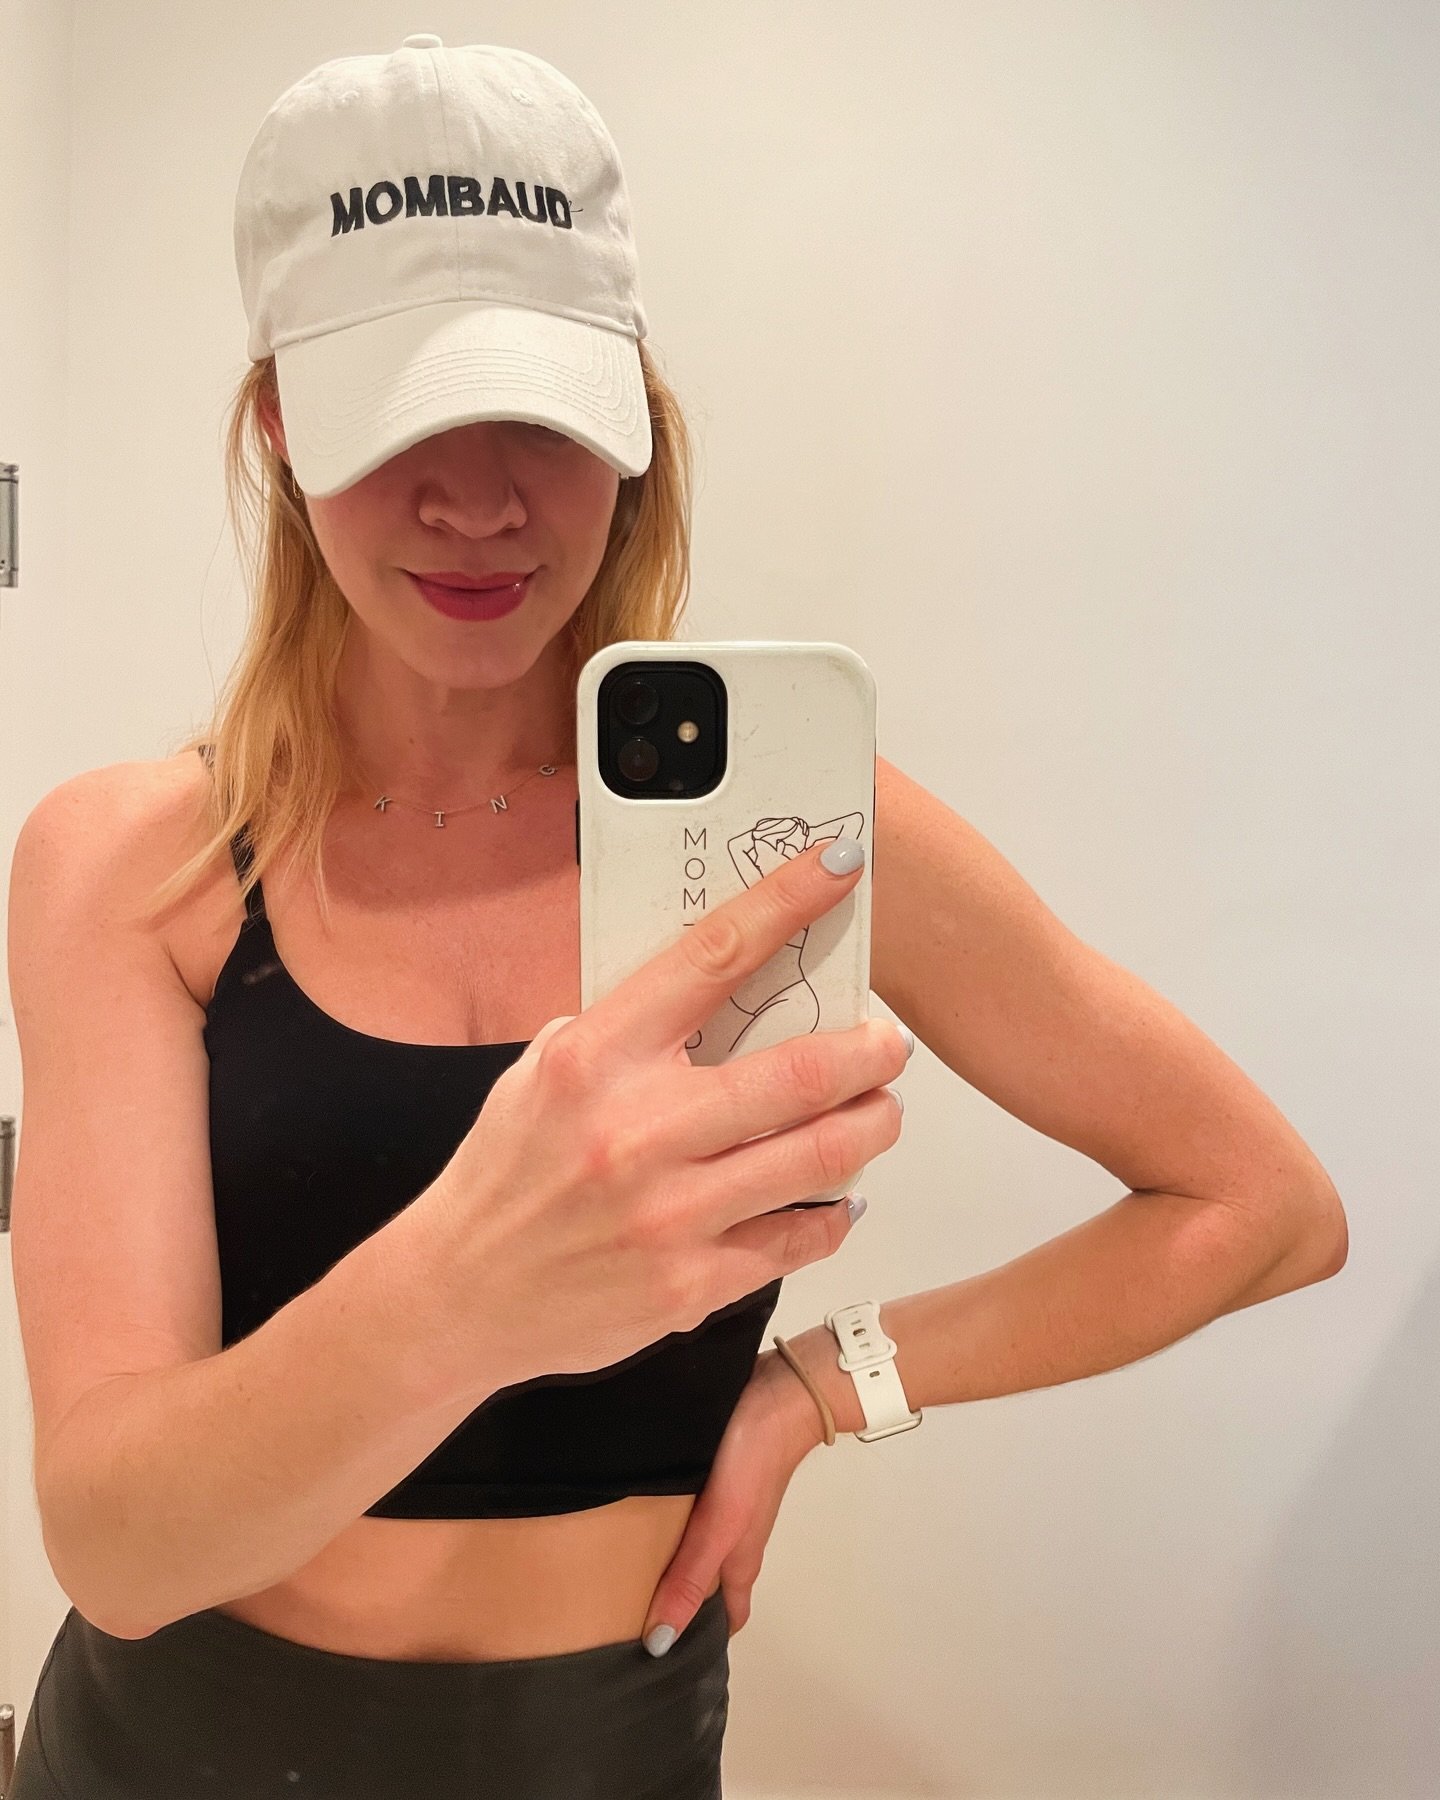 Moms-to-be, new moms, and veteran moms all need support through all different parts of their journey. Give the gift of wellness this #mothersday ! Any gift card purchase over $100 will get a free MOMBAUD hat! 

#momlife #momtobe #momsofnyc #prenatalf